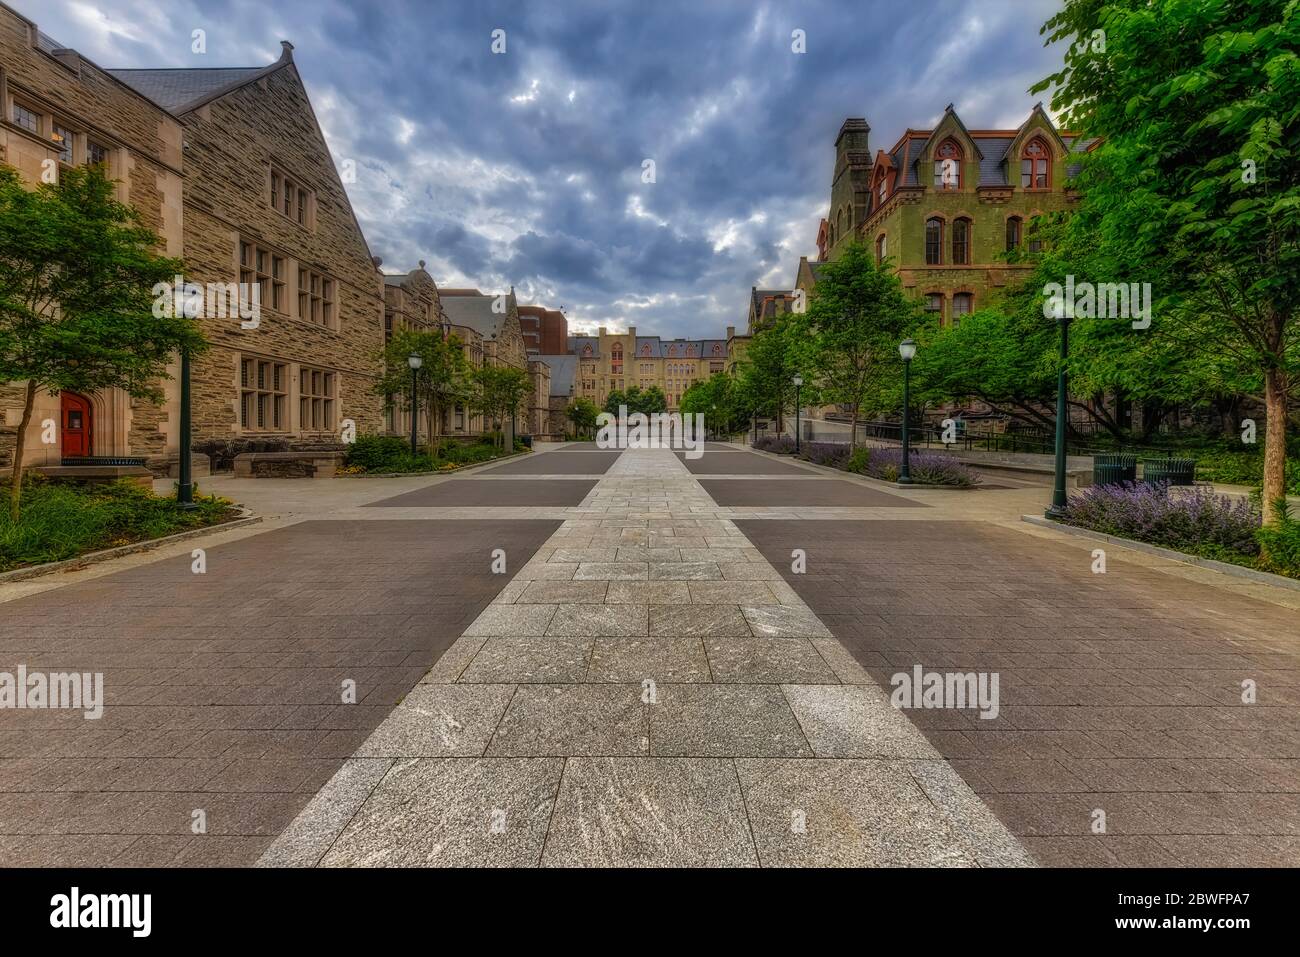 U-Penn Perelman Quadrangle - View to the entire section from one end to the other of the historic University of Pennsylvania in West Philadelphia, PA. Stock Photo